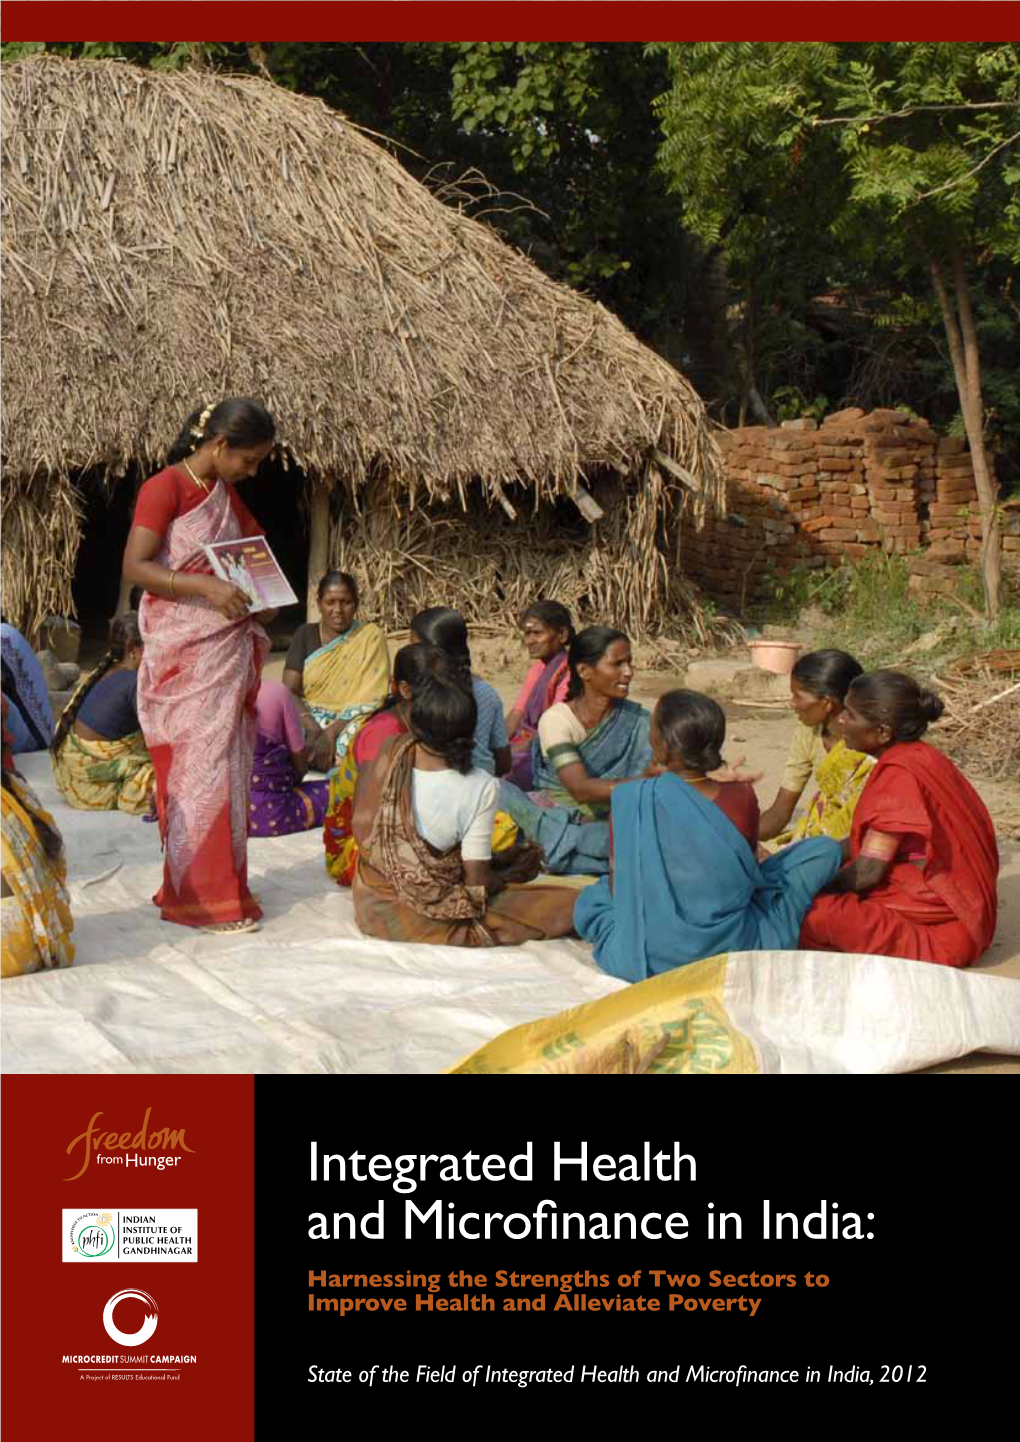 Integrated Health and Microfinance in India: Harnessing the Strengths of Two Sectors to Improve Health and Alleviate Poverty